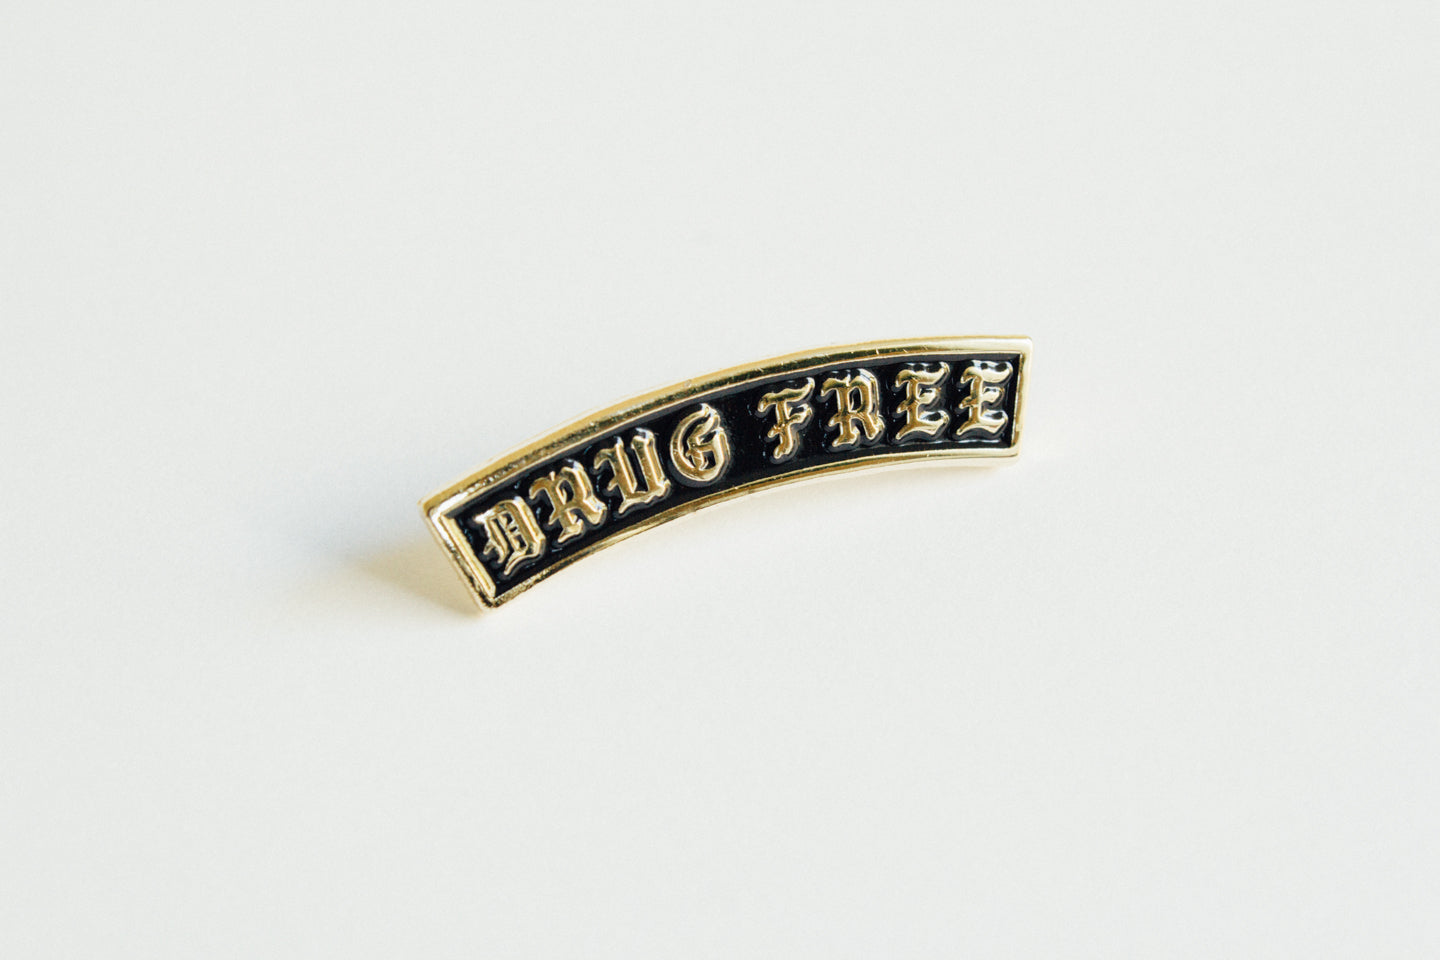 Drug Free Arch Straight Edge Lapel Pin in black and gold by STRAIGHTEDGEWORLDWIDE